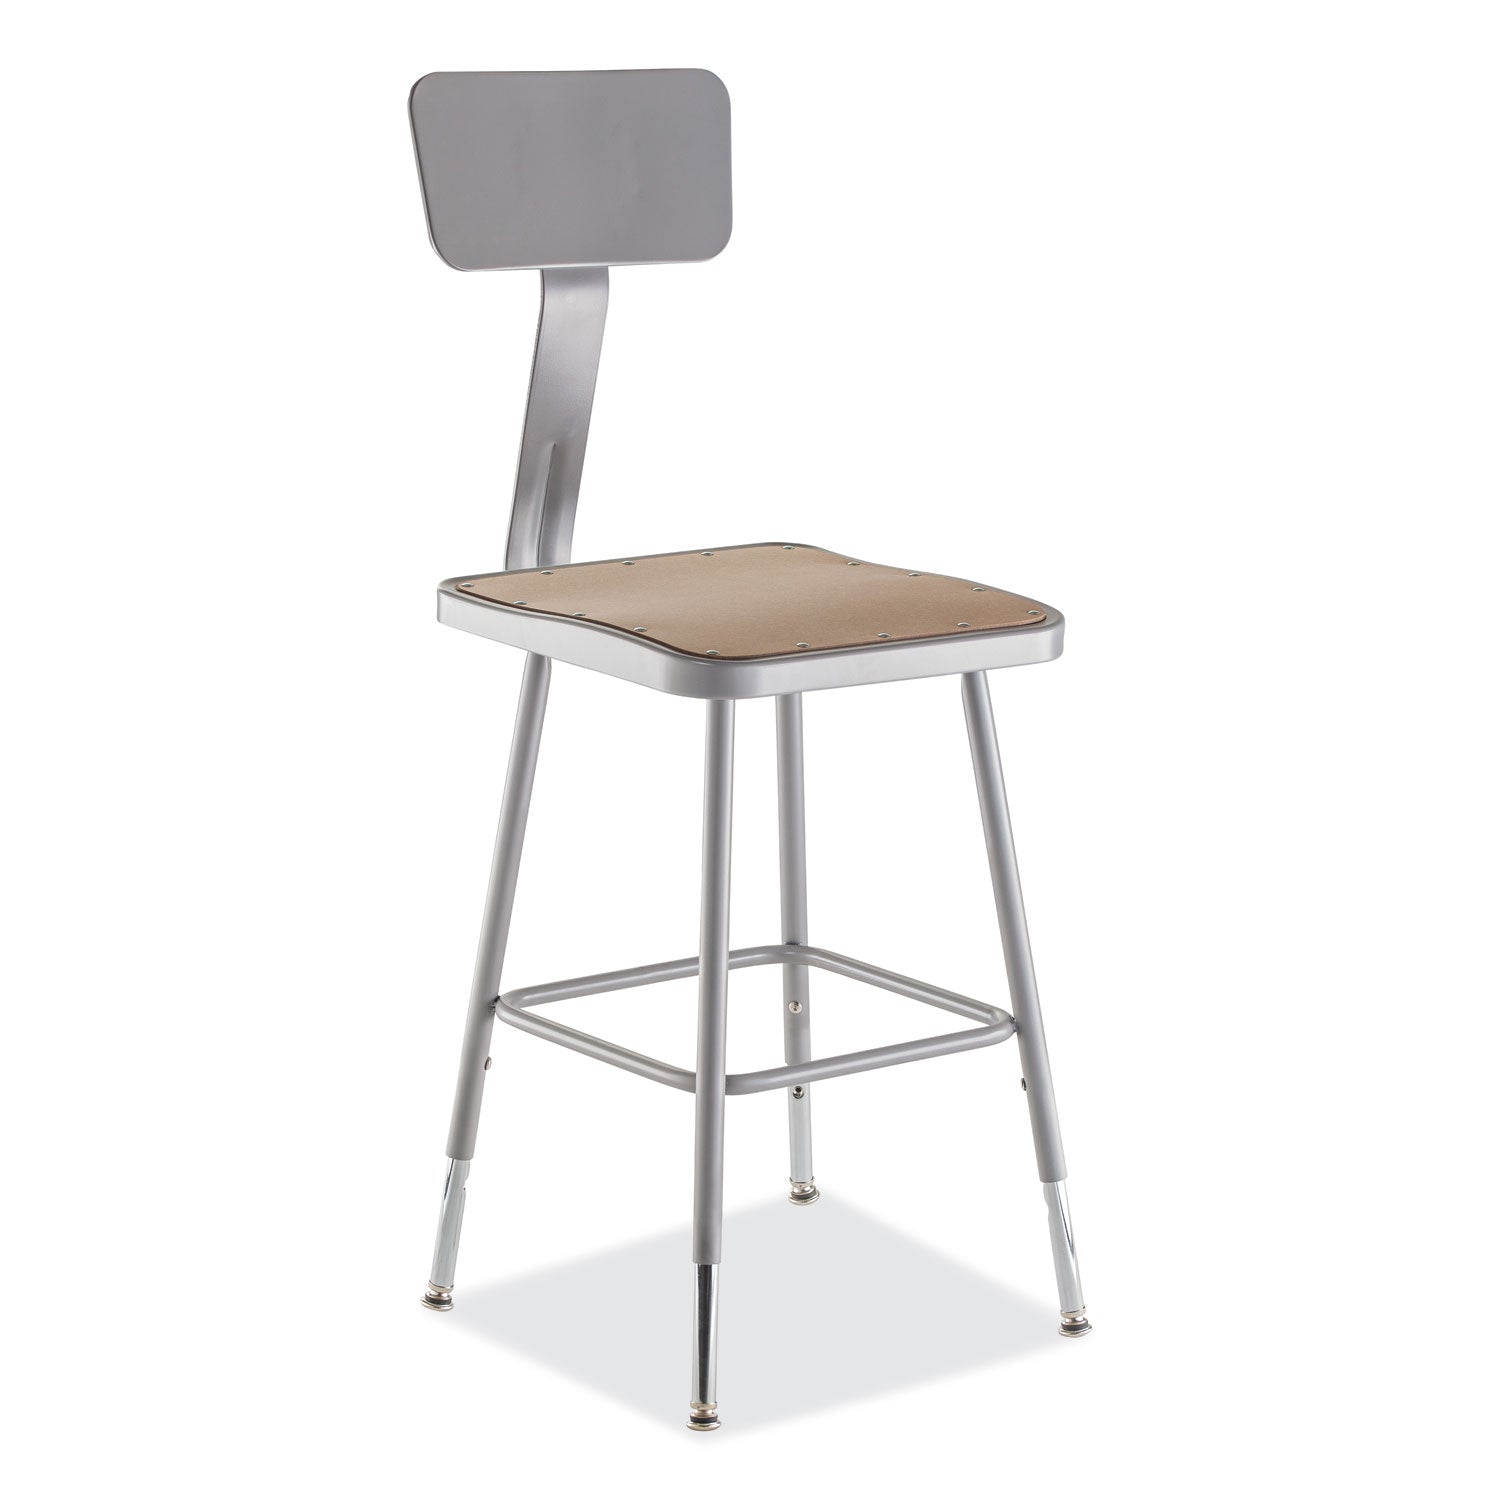 6300-series-height-adj-hd-square-seat-steel-stool-w-back-supports-500-lb-18-26-seat-ht-brown-gray-ships-in-1-3-bus-days_nps6318hb - 1